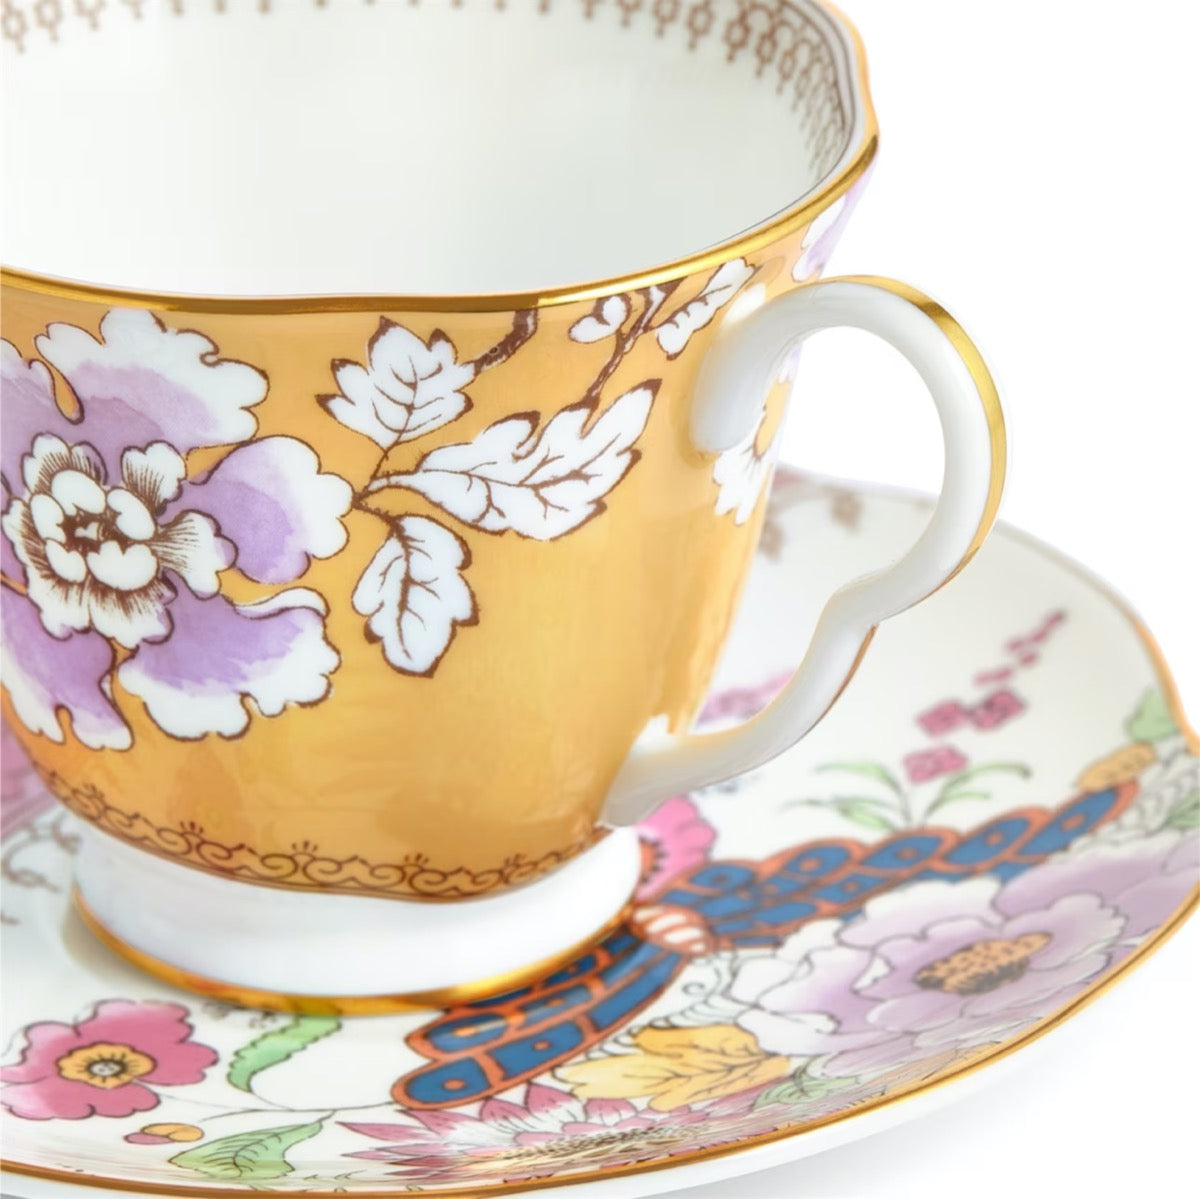 vintage Wedgwood butterfly bloom yellow teacup and saucer set